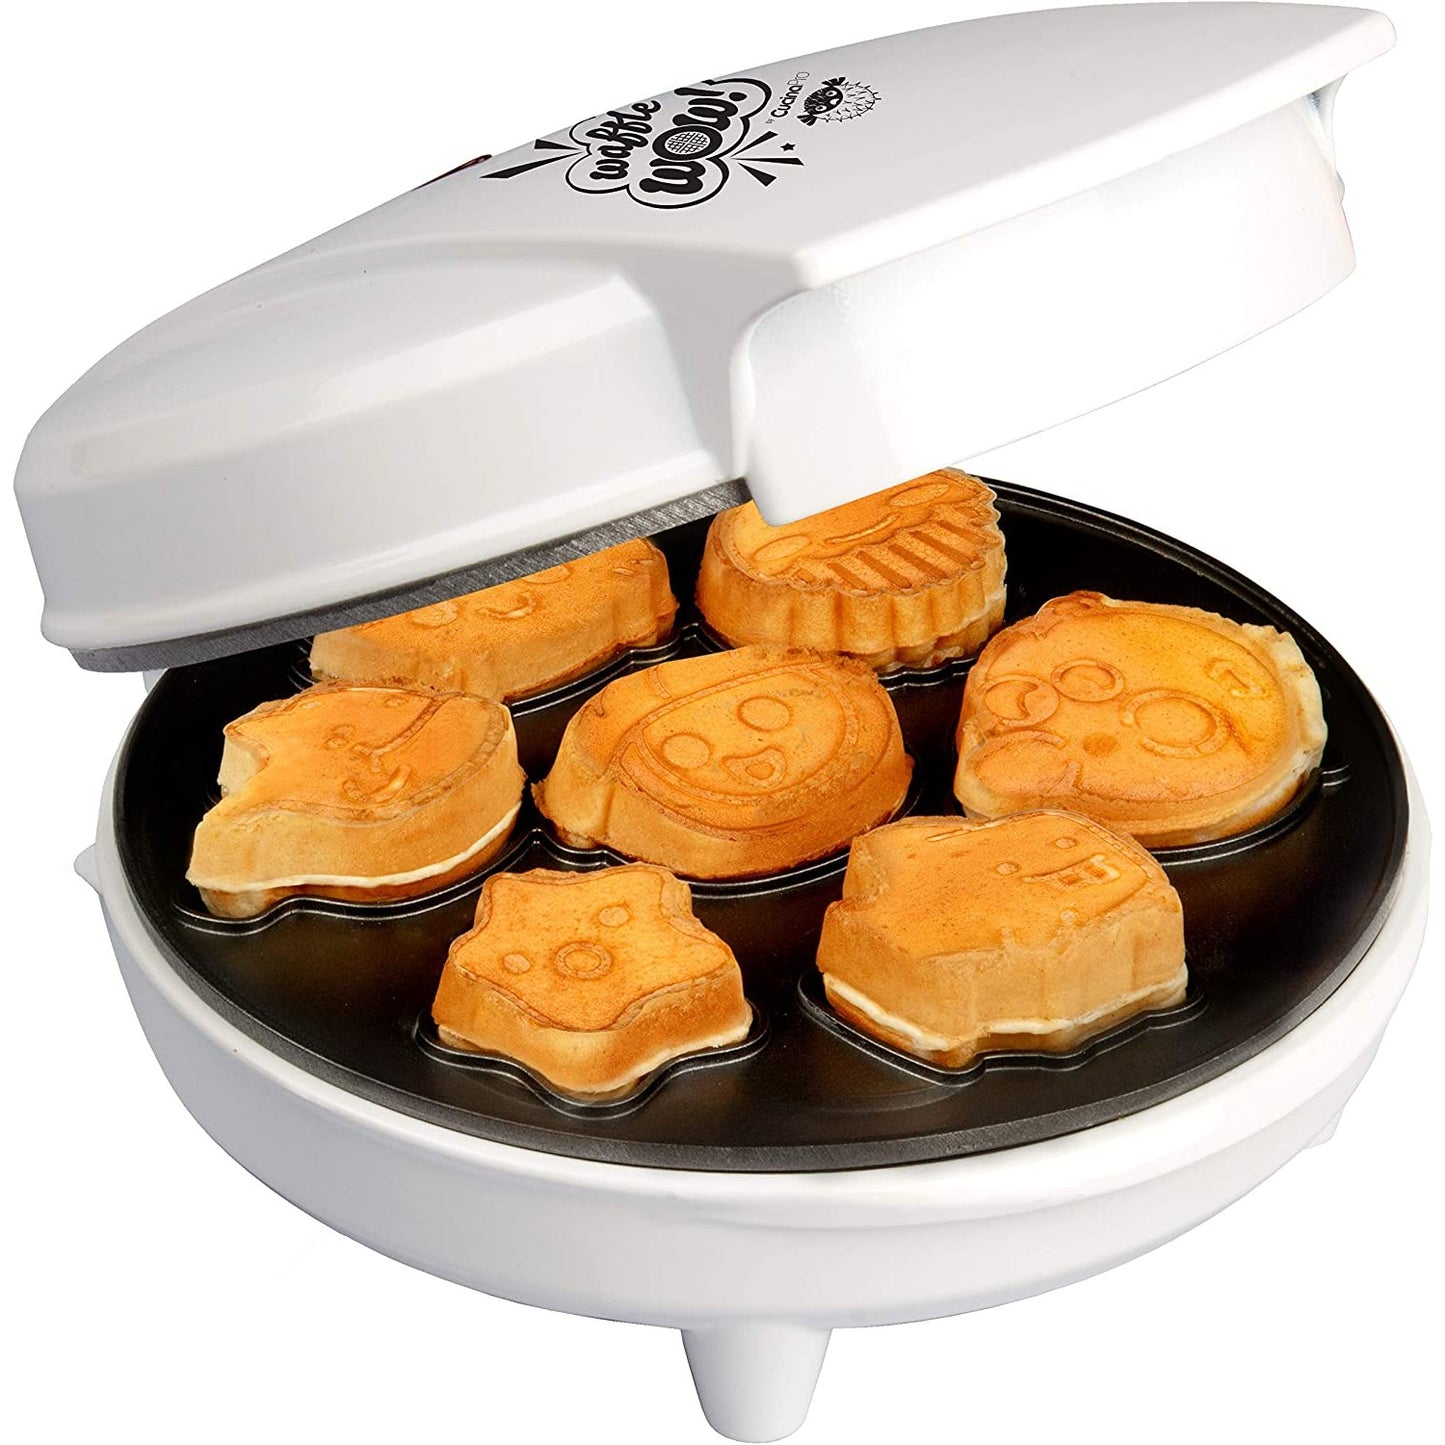 An electric waffle maker which makes sea creature shaped waffles for kids. There are ready-made waffles in the maker showing examples of the sea creatures the waffle maker can cook.